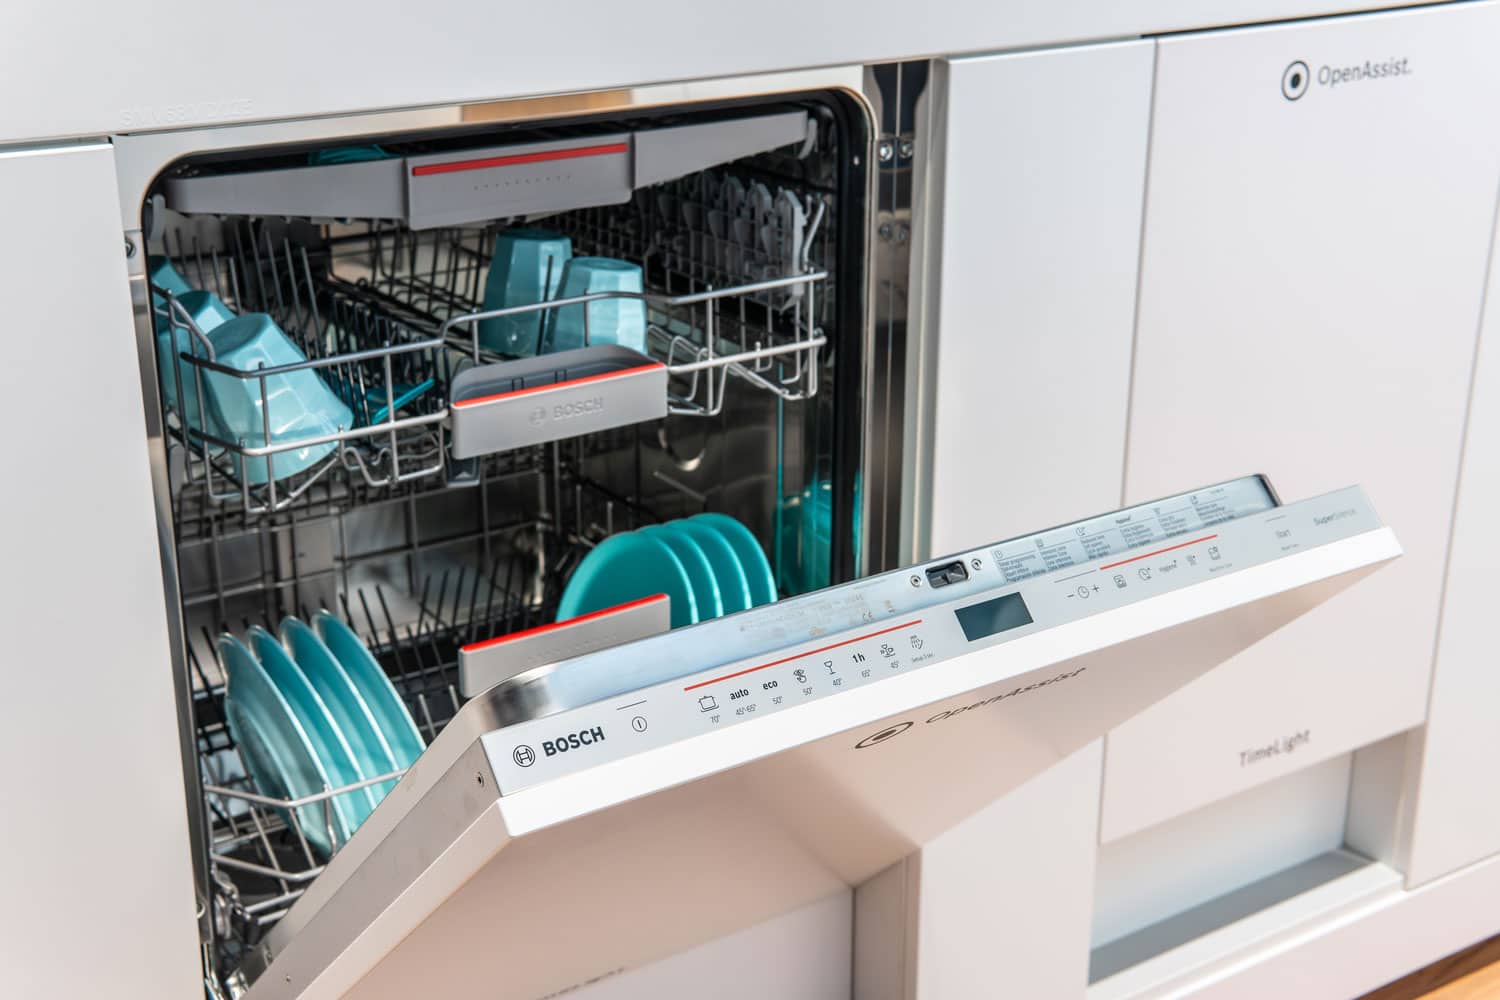  new Built-in Bosch OpenAssist SMV68MD02E dishwasher on display, at Robert Bosch exhibition pavilion showroom, stand at Global Innovations Show IFA